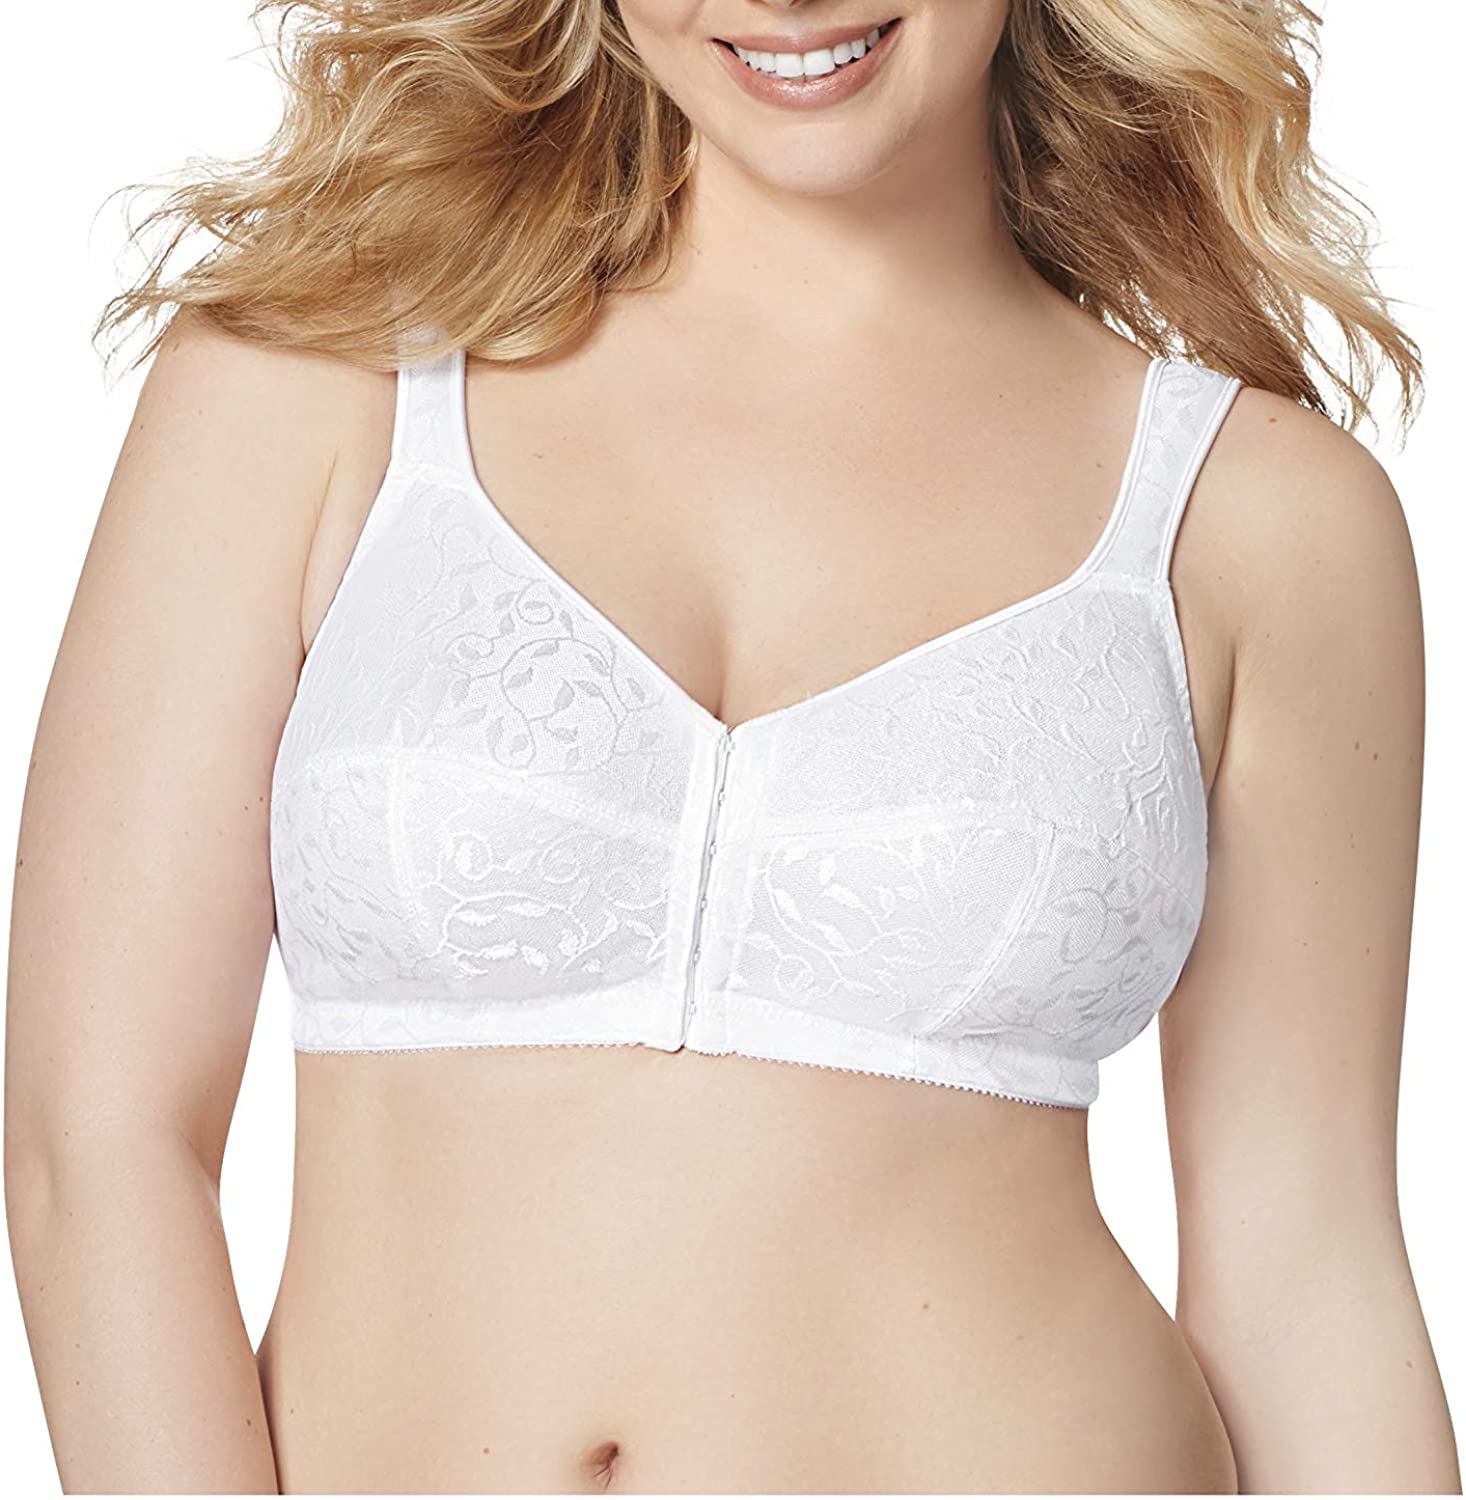 Best Front-Closure Bras for Seniors with Sagging Breasts